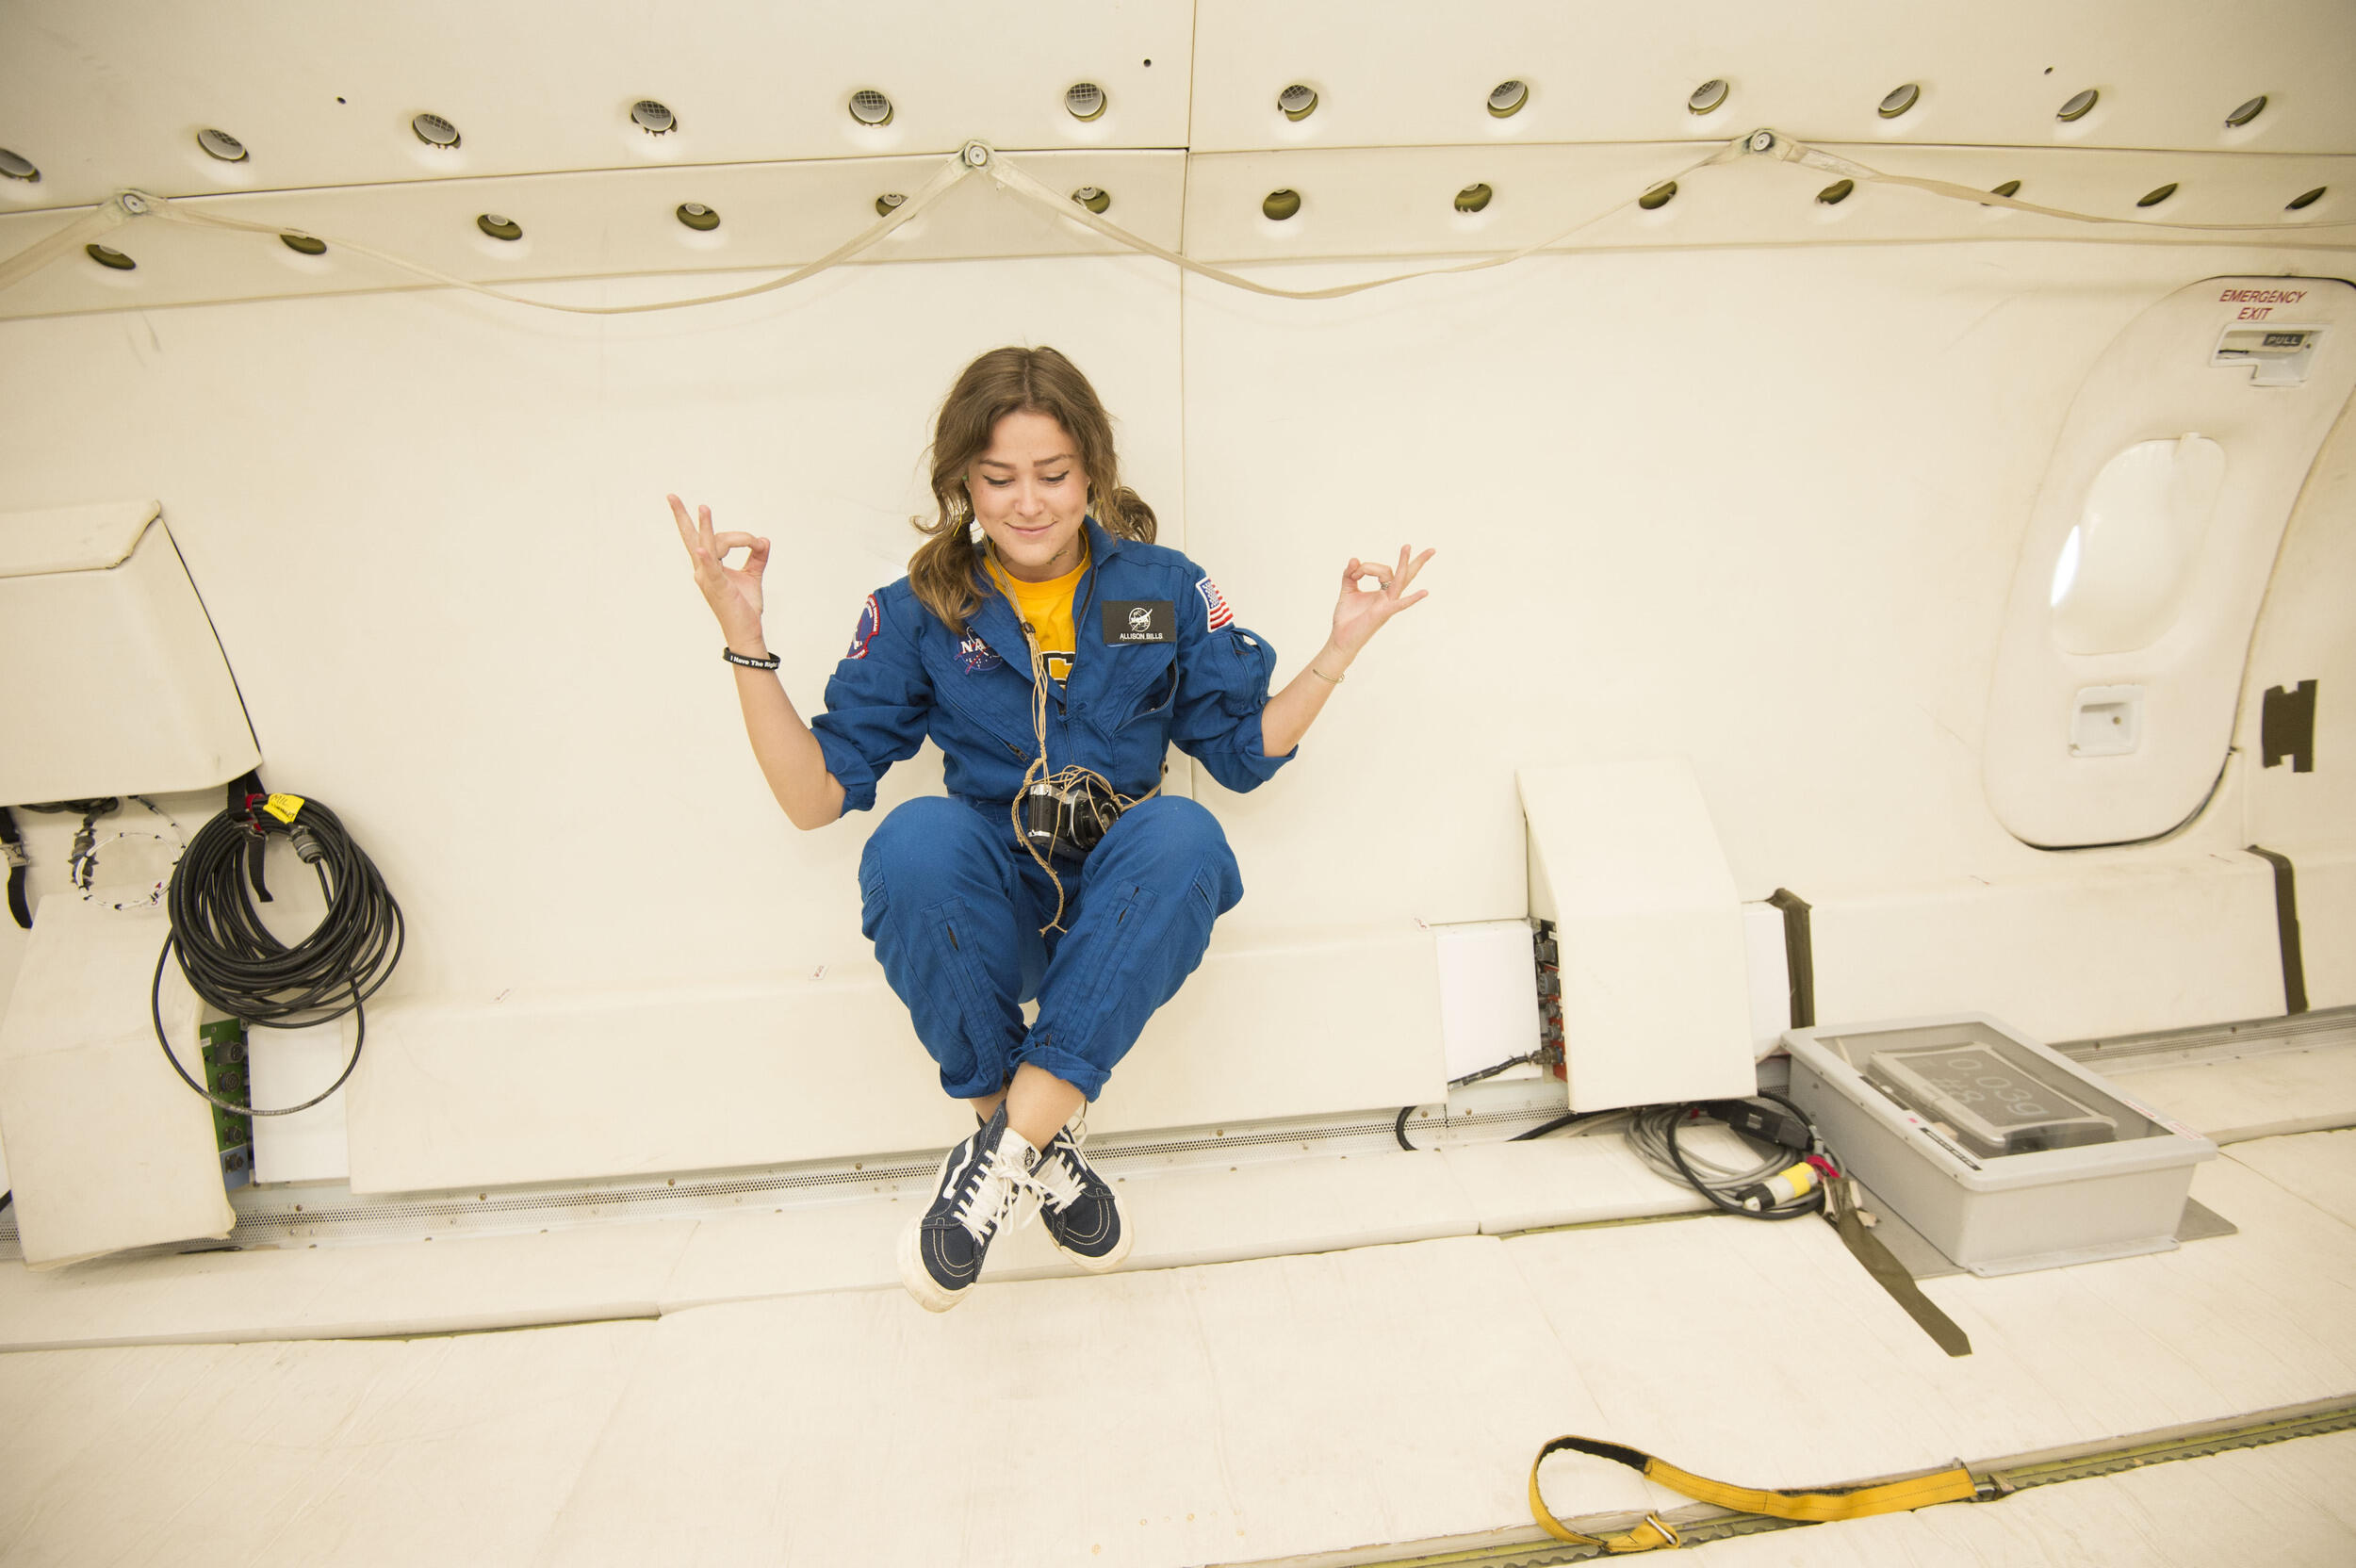 "Here's another photograph from zero-G! I started off on the ground of the plane and then just floated up to the top." 